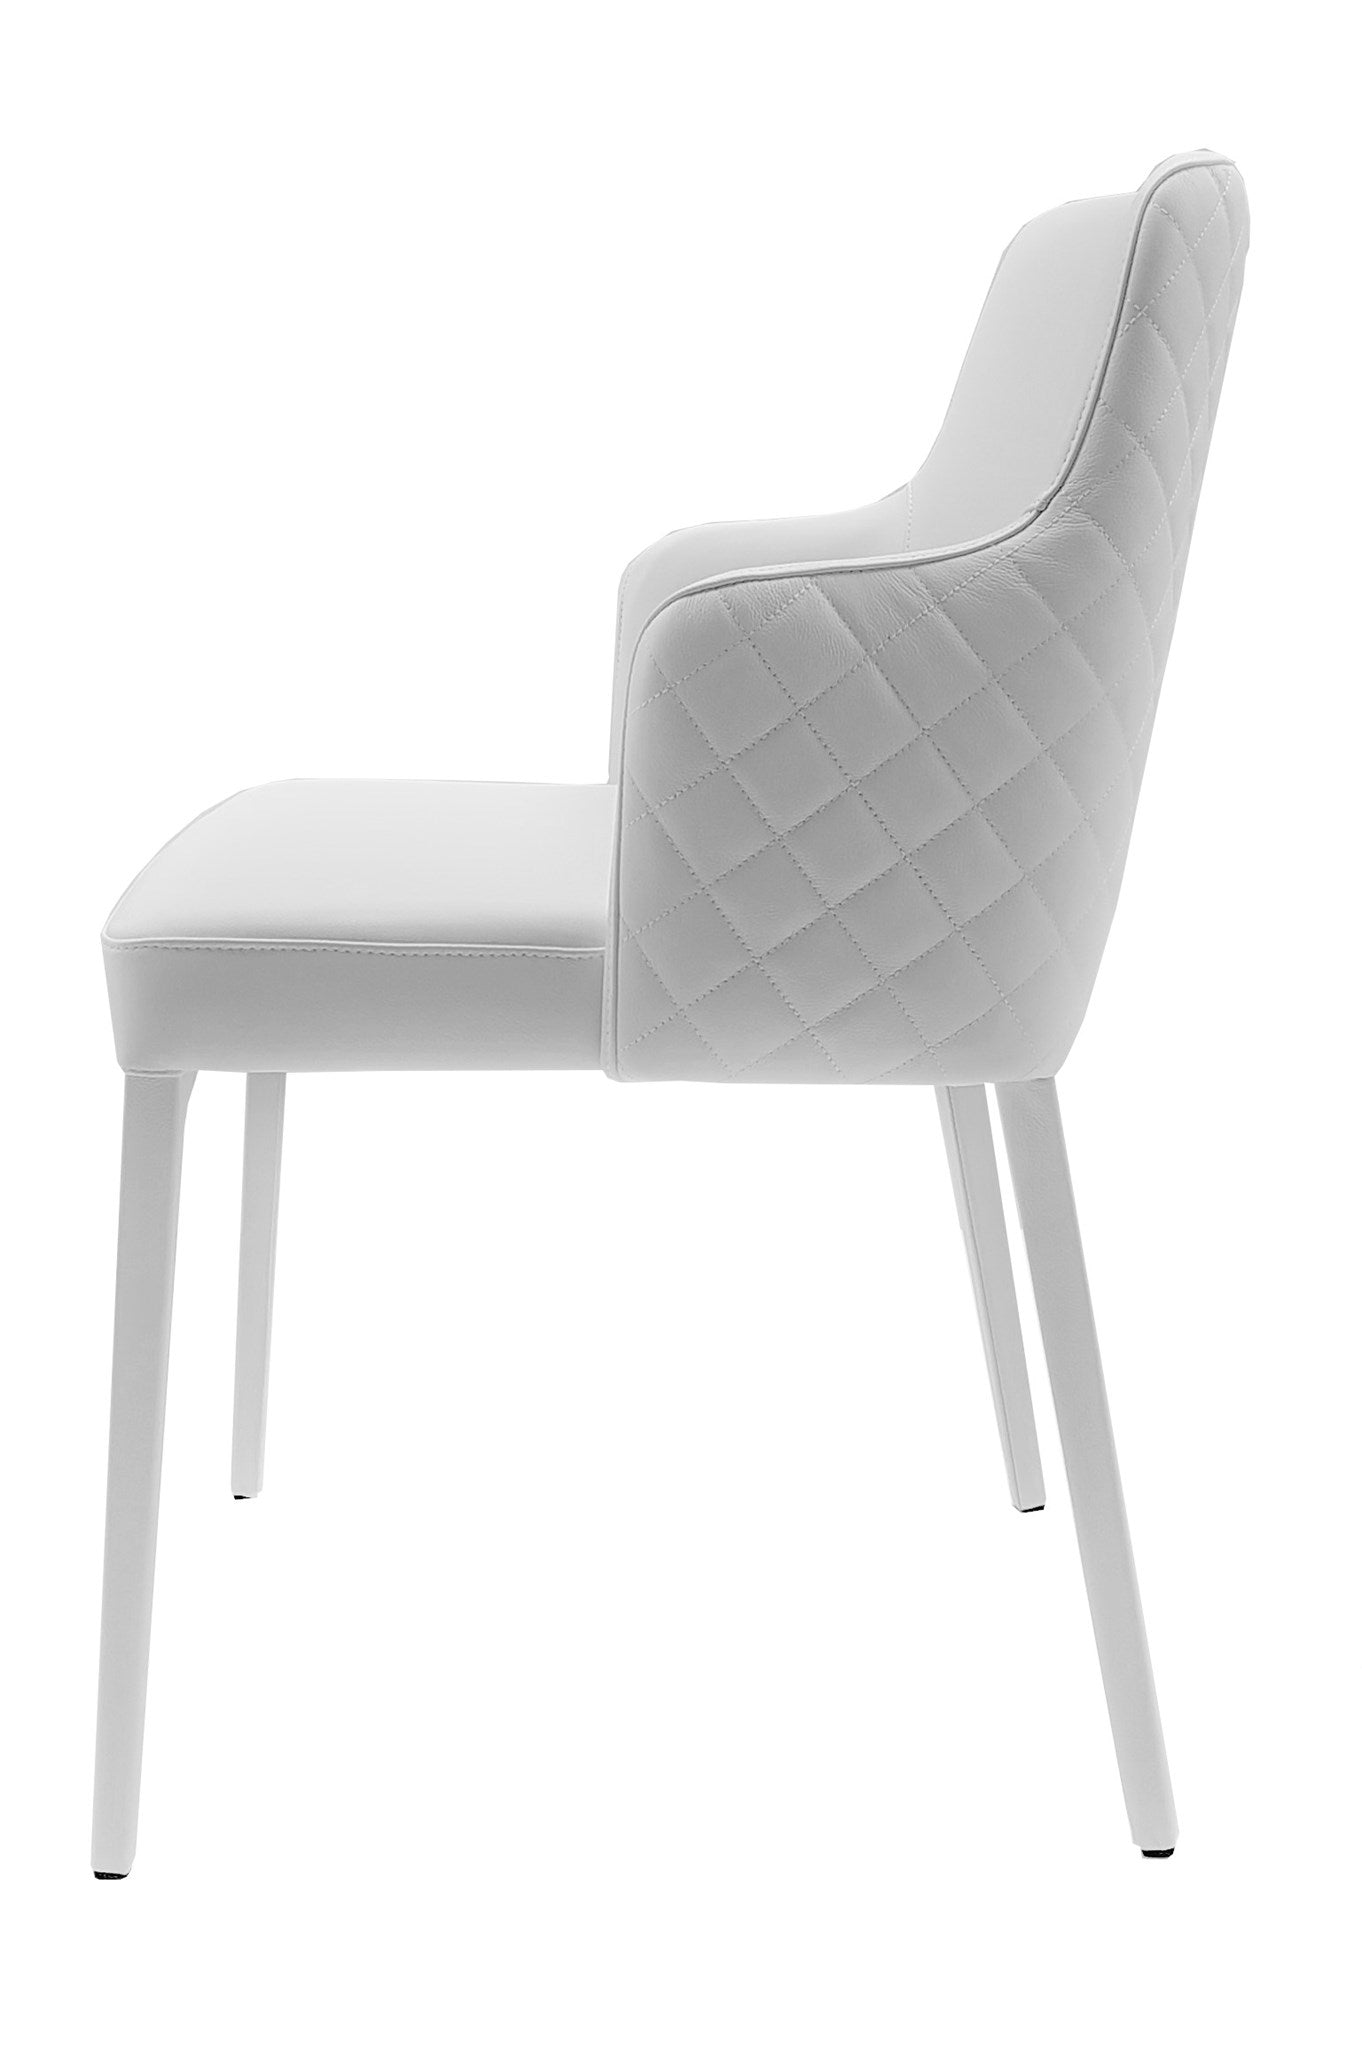 Polly-A dining chair white - Dreamart Gallery